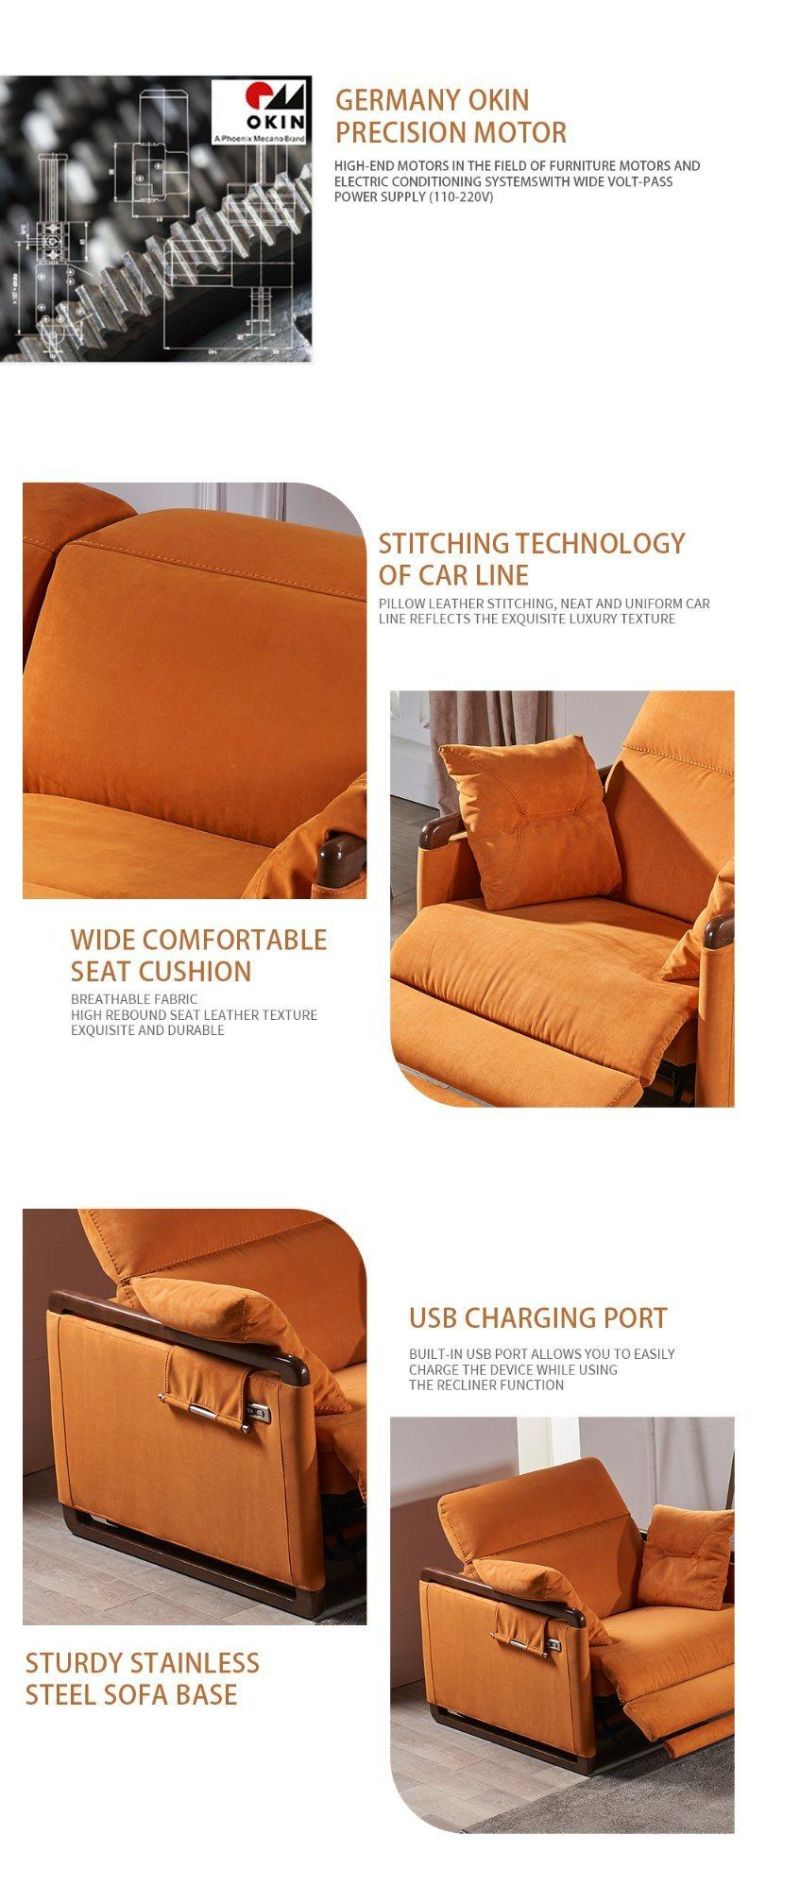 Love-Seat Chaise Reclining Couch Recliner Sofa Chair